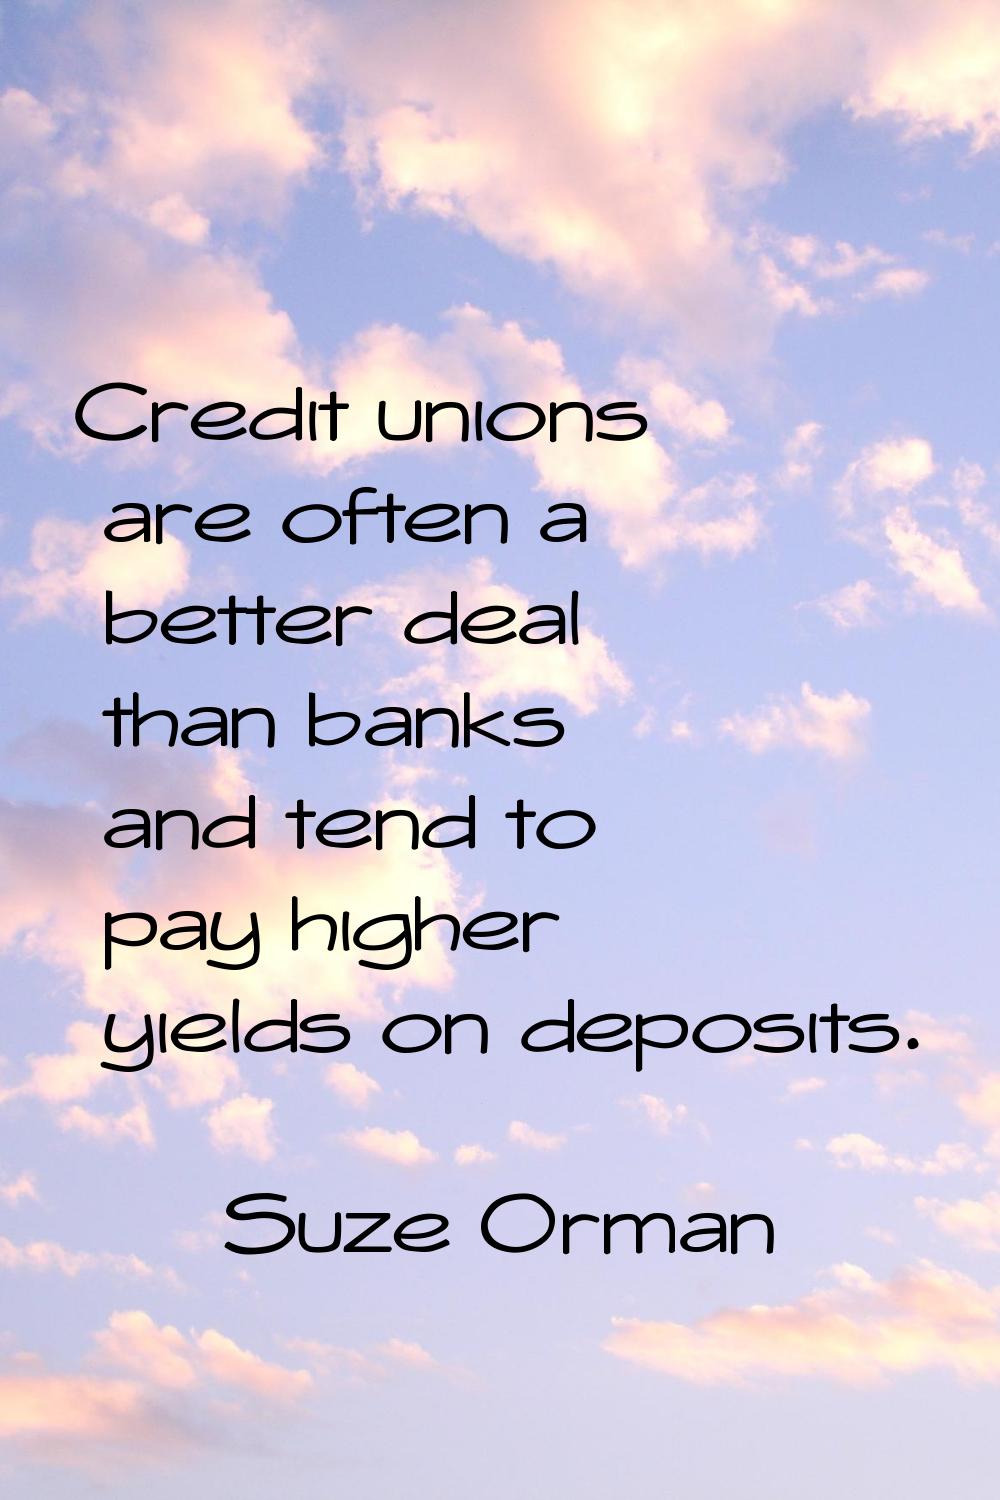 Credit unions are often a better deal than banks and tend to pay higher yields on deposits.